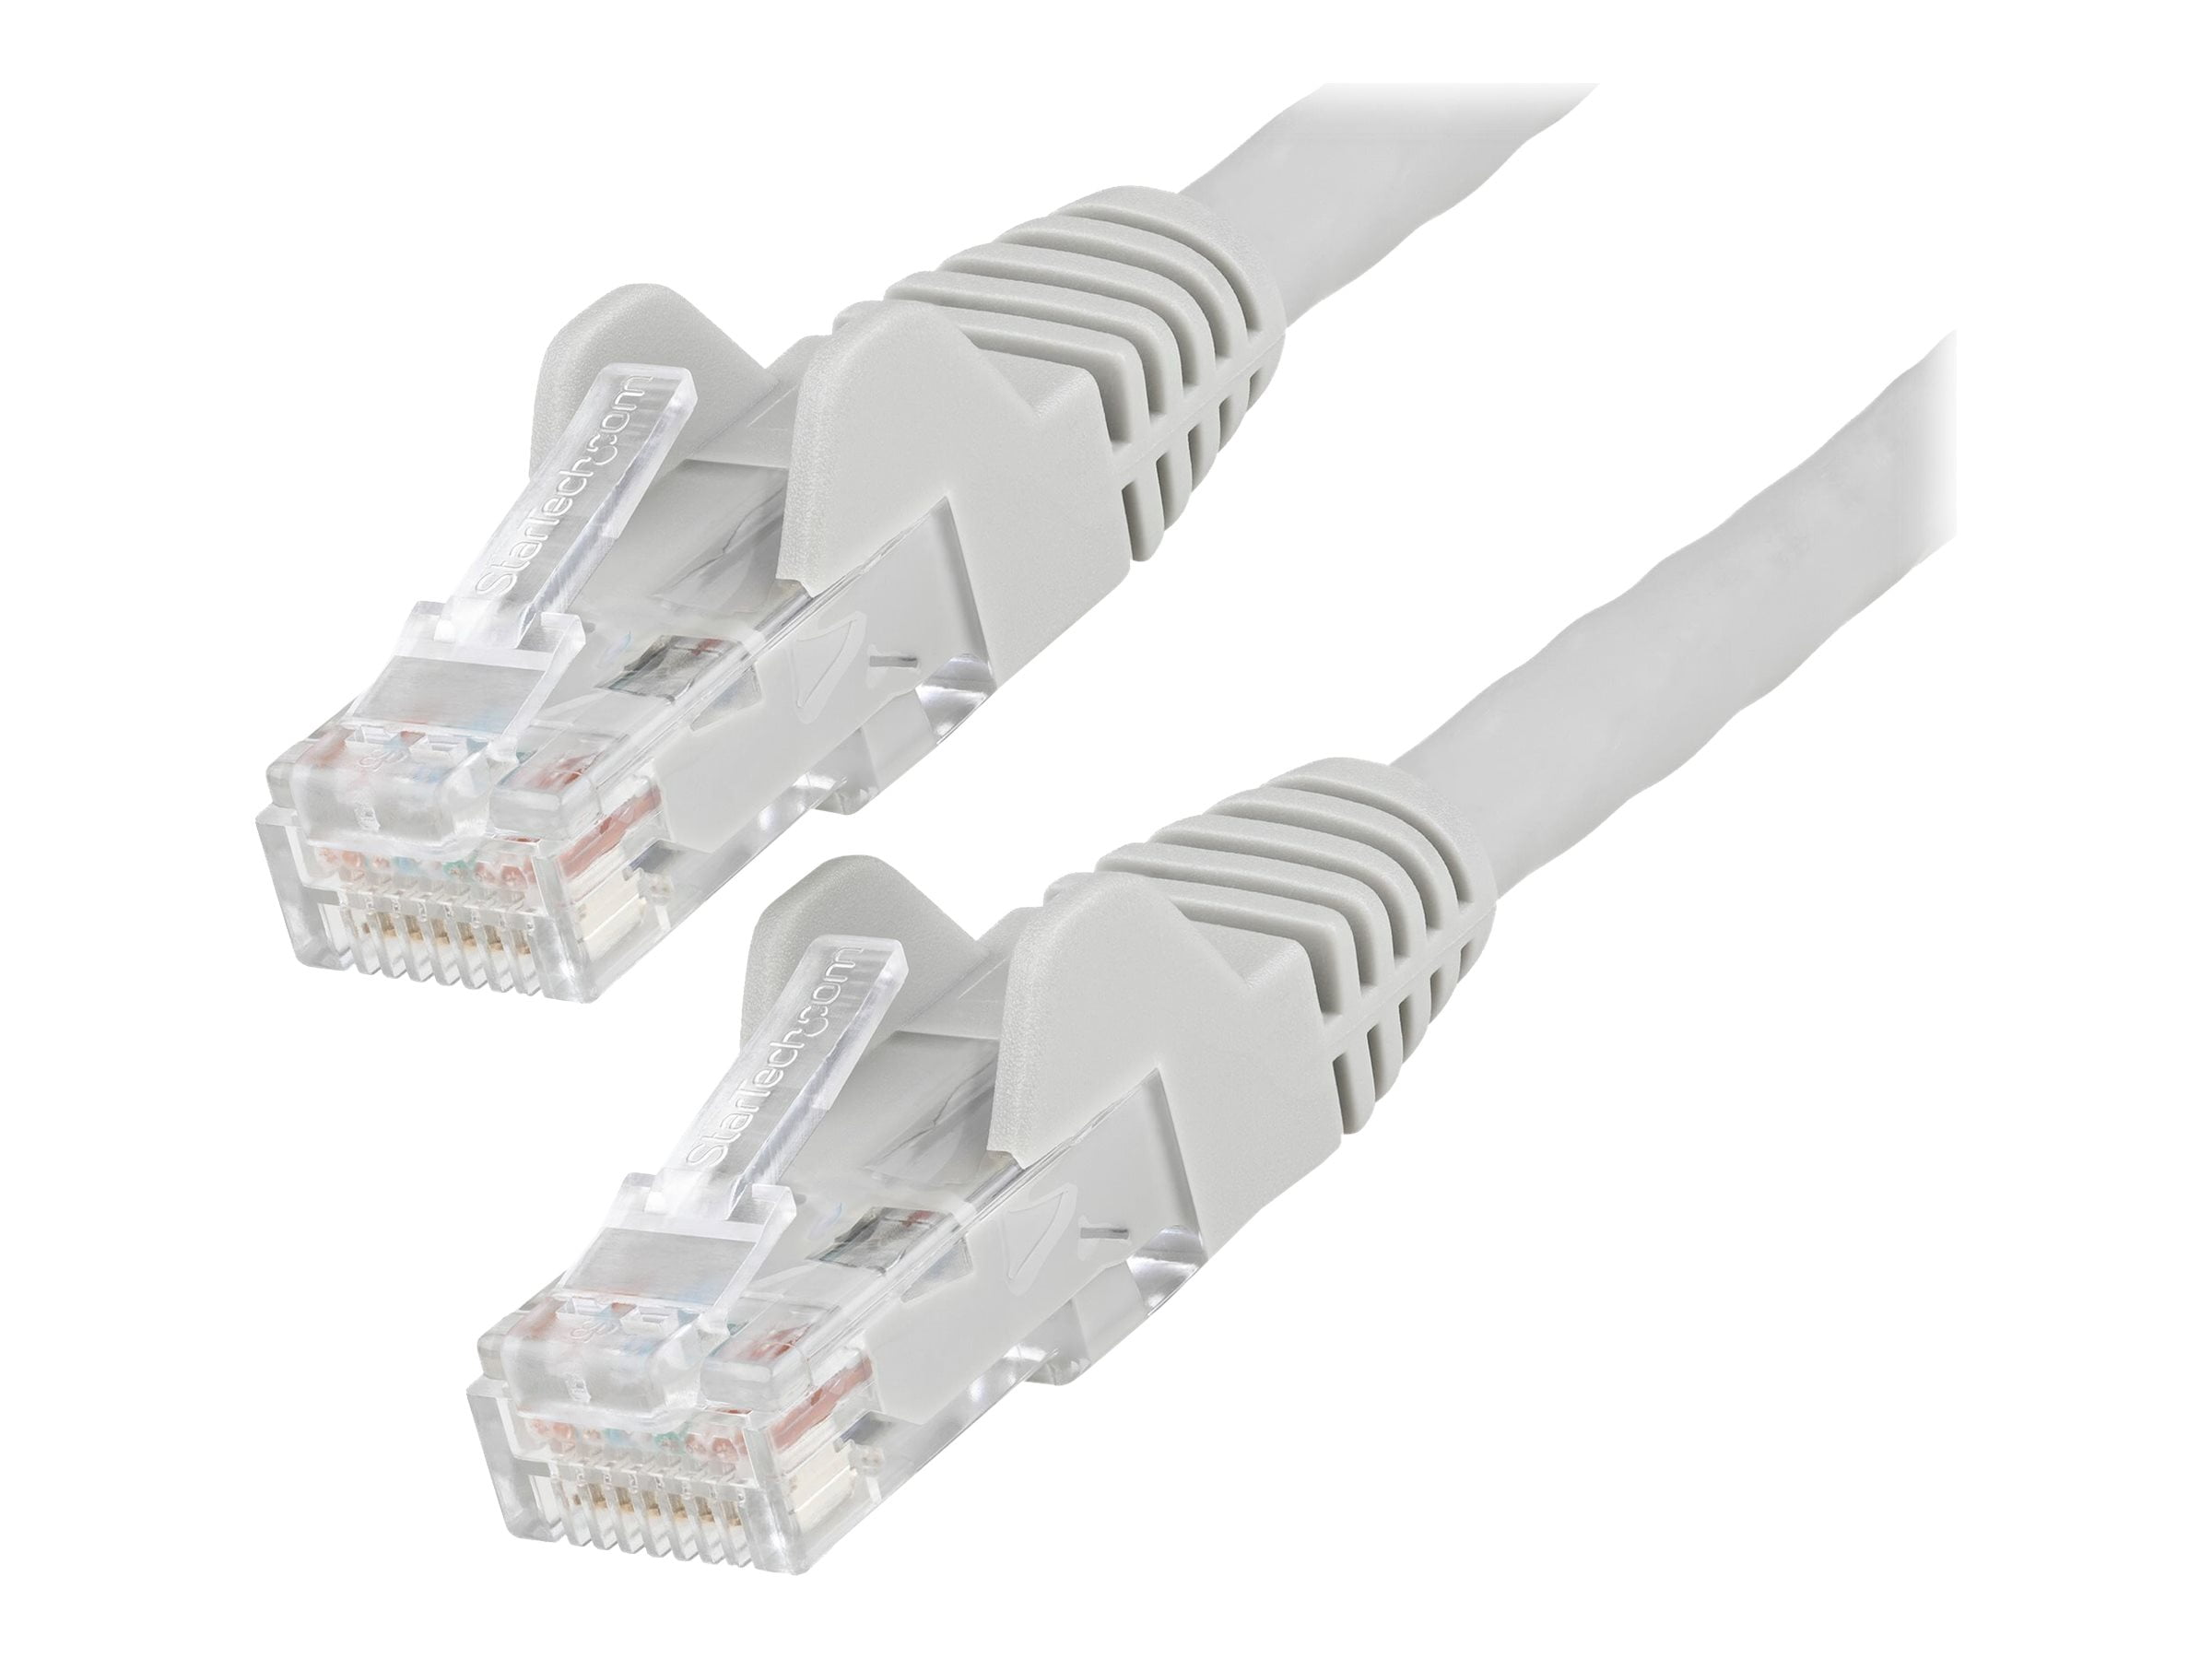 45 Male Rj Black Product Type: Hardware Connectivity/Connector Cables Black Network Patch Cable 25Ft Category 6 For Network Device Utp 45 Male Rj 25Ft Cat6 Snagless Unshielded 